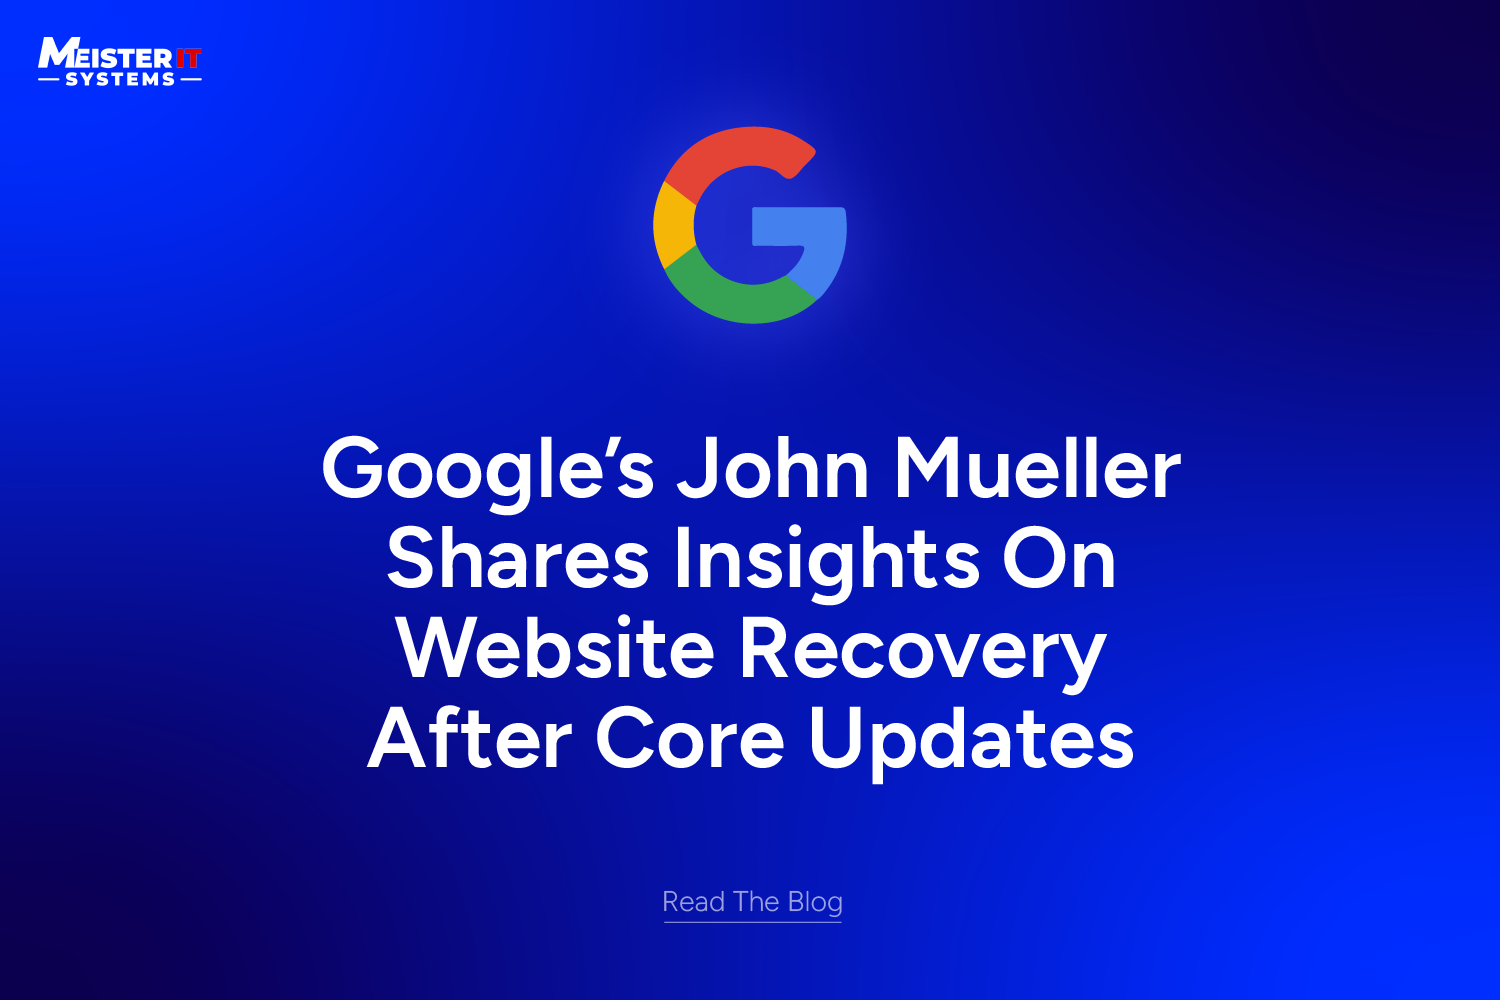 Google’s John Mueller Shares Insights On Website Recovery After Core Updates